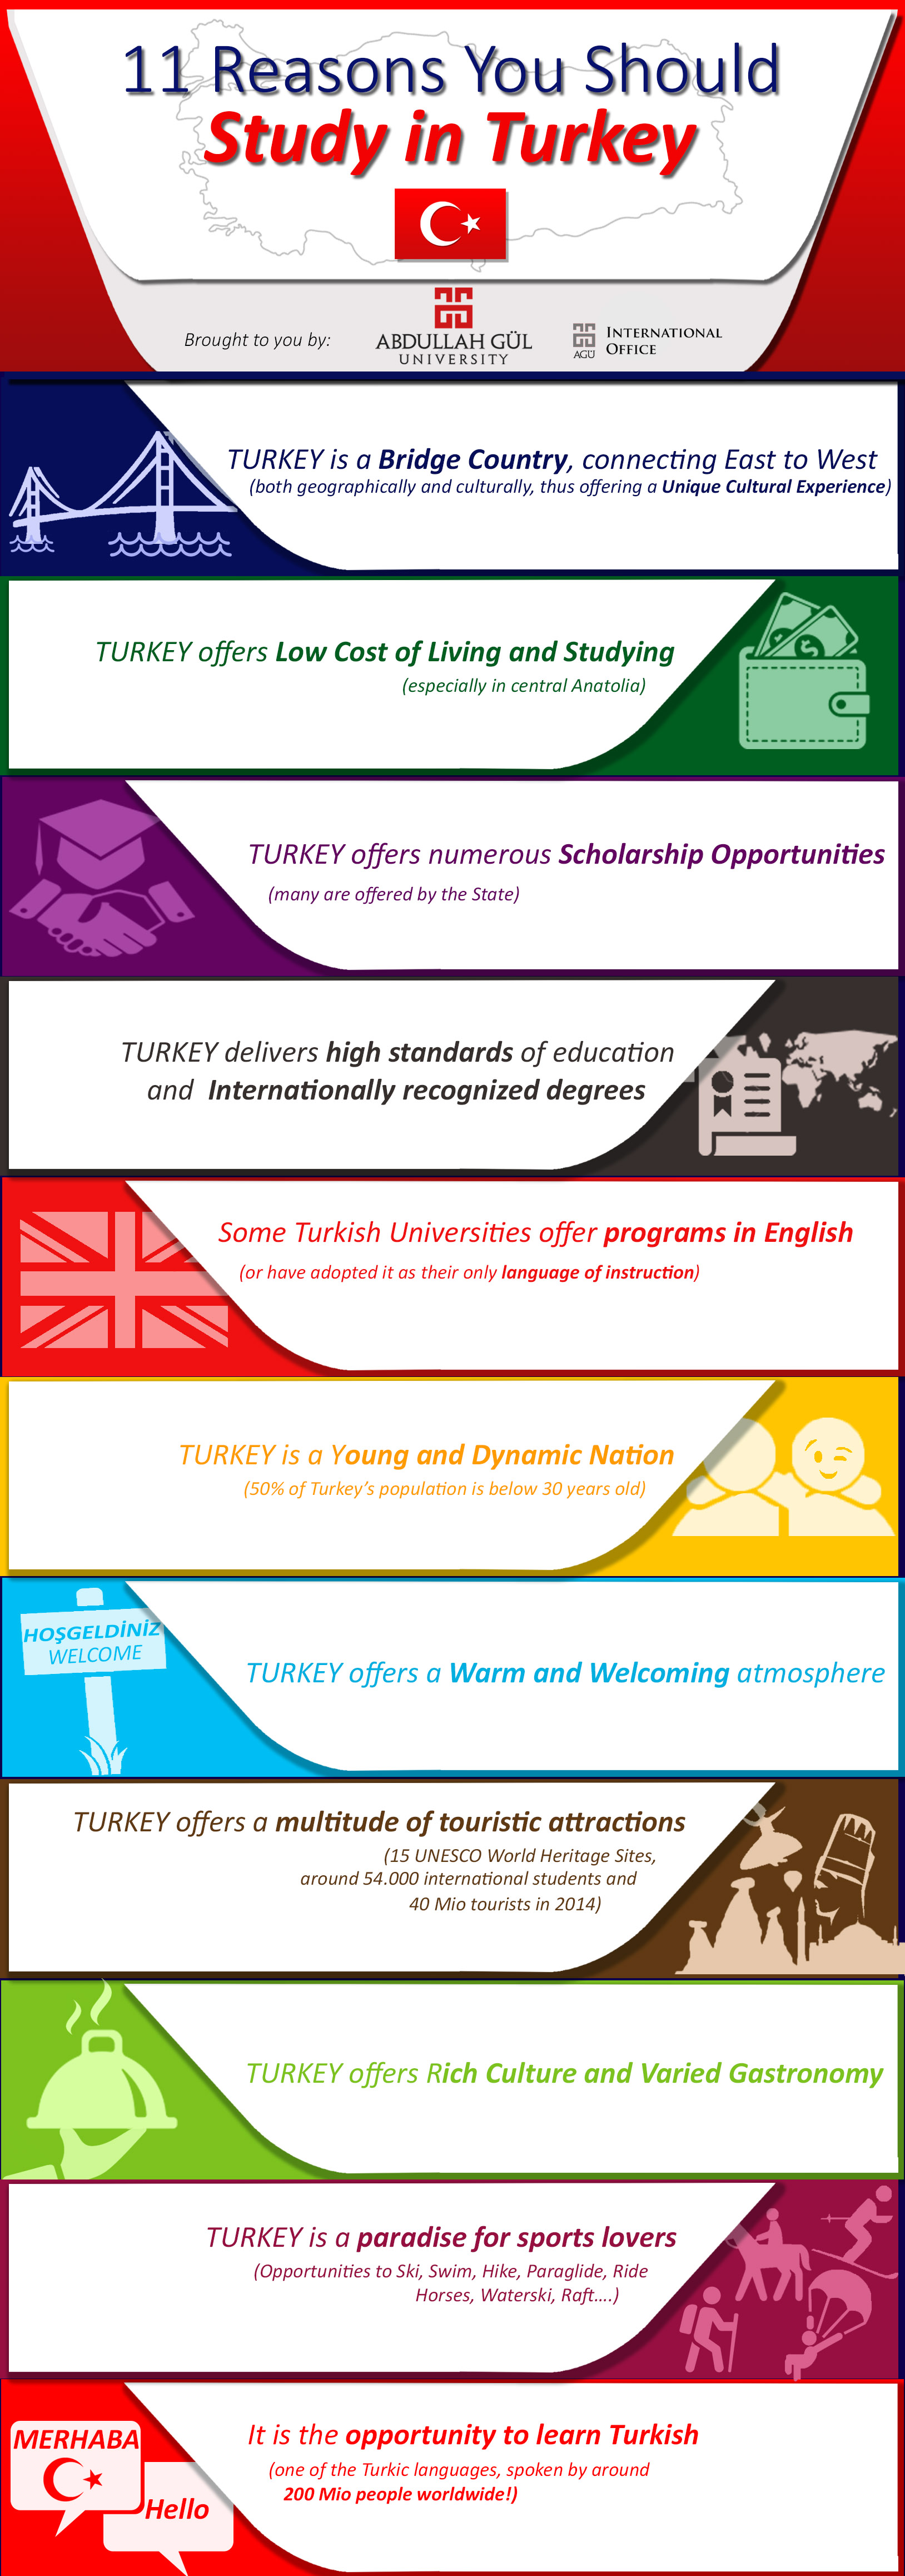 Abdullah Gül University, AGU, why Turkey, Study in Turkey, Advantages, International Office, Gastronomy, Tourism, Low Cost, Welcome, Learn Turkish, High Quality Education, Internationally Recognized Degrees, Scholarships, Sports, Programs in English